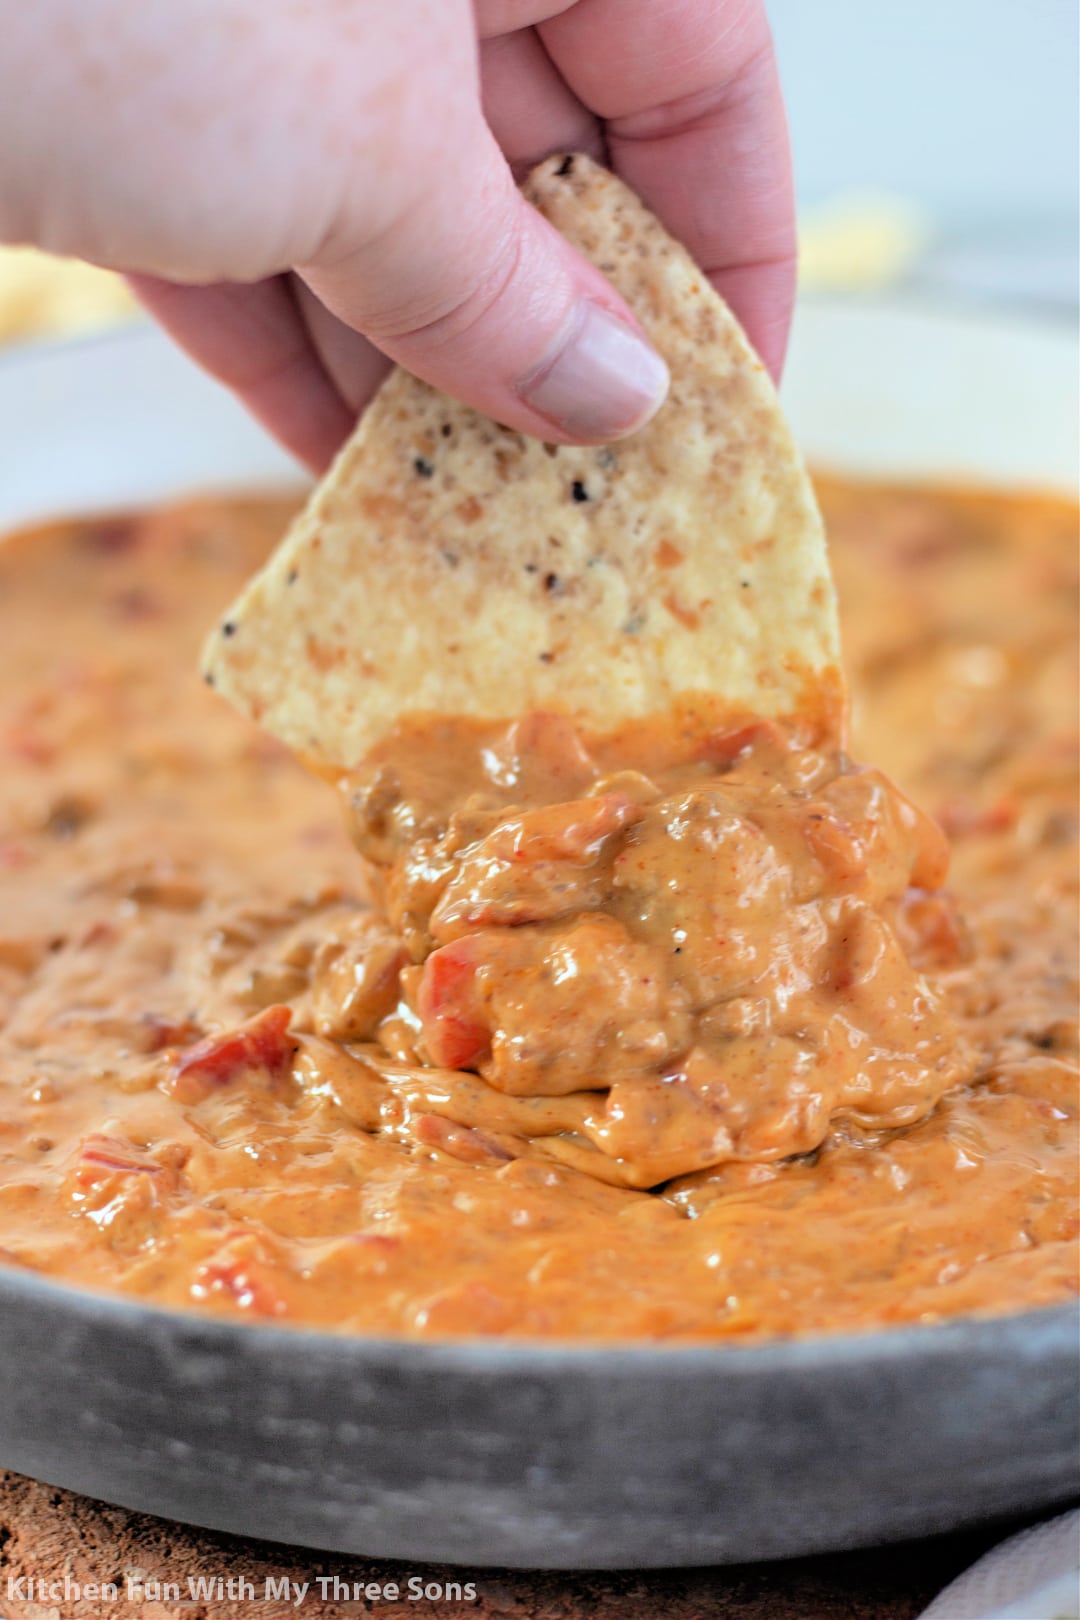 dipping a chip into homemade Rotel.